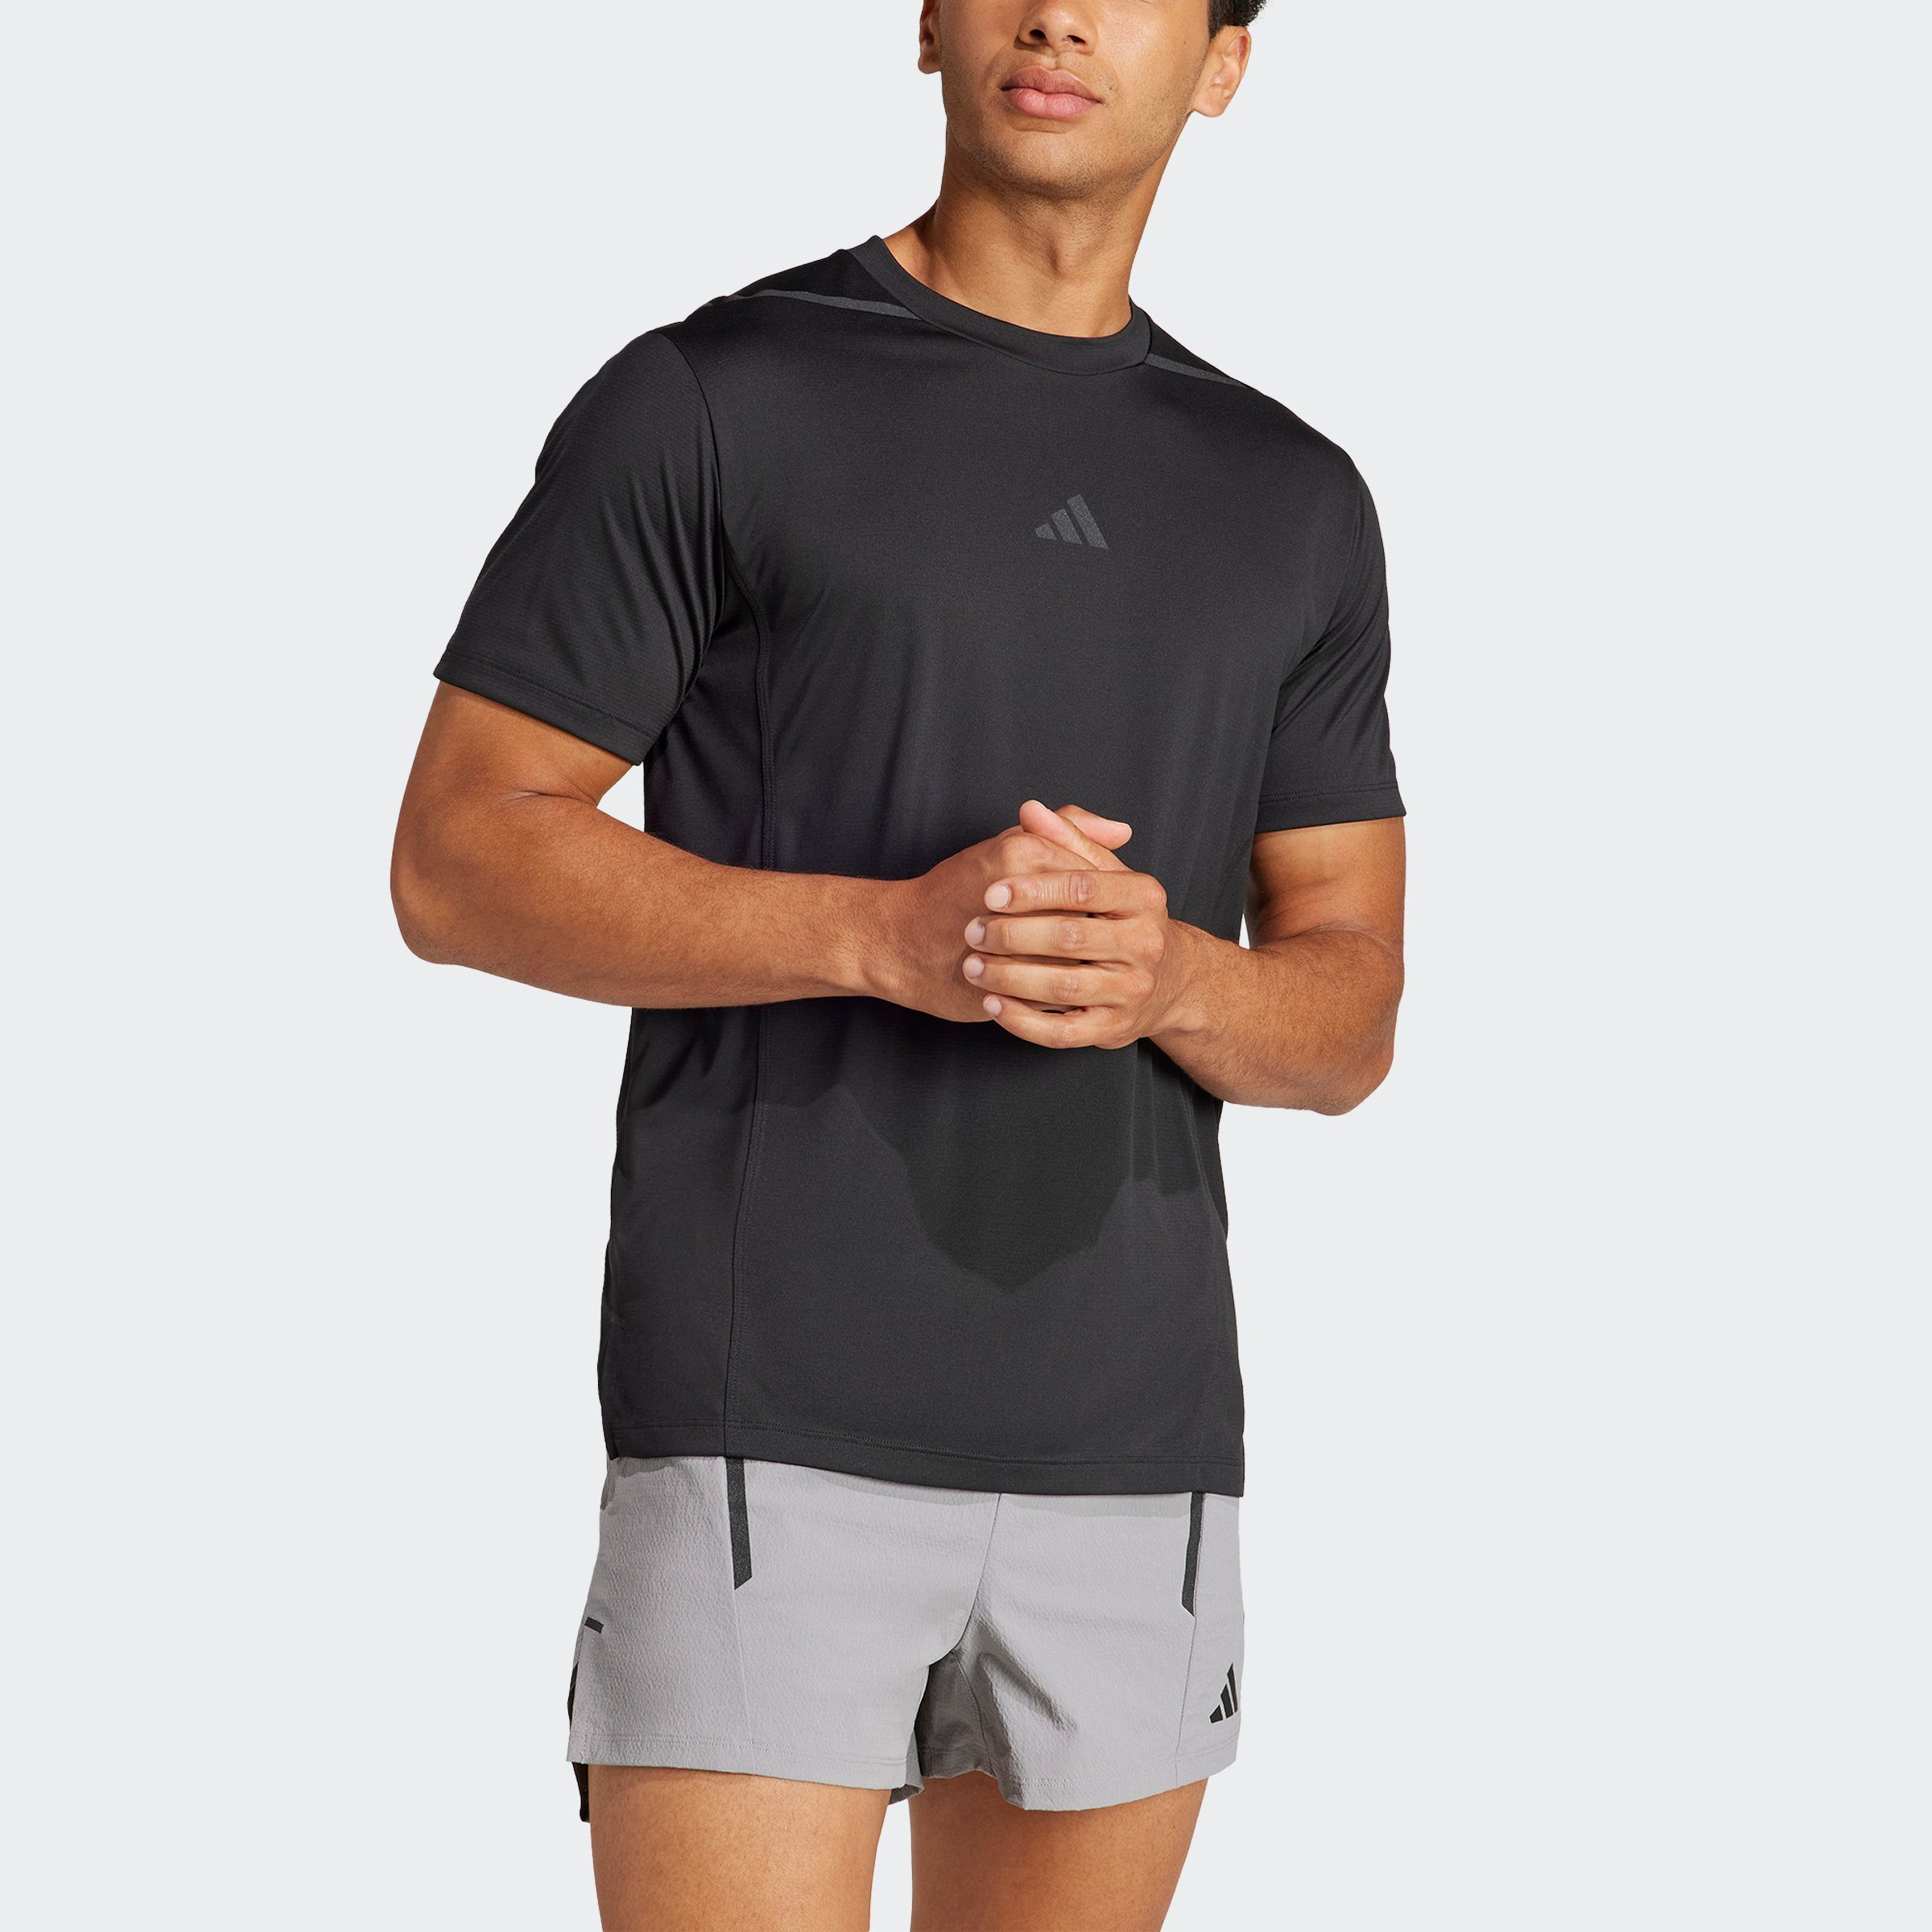 Adidas Performance Designed for Training Adistrong Workout T-shirt